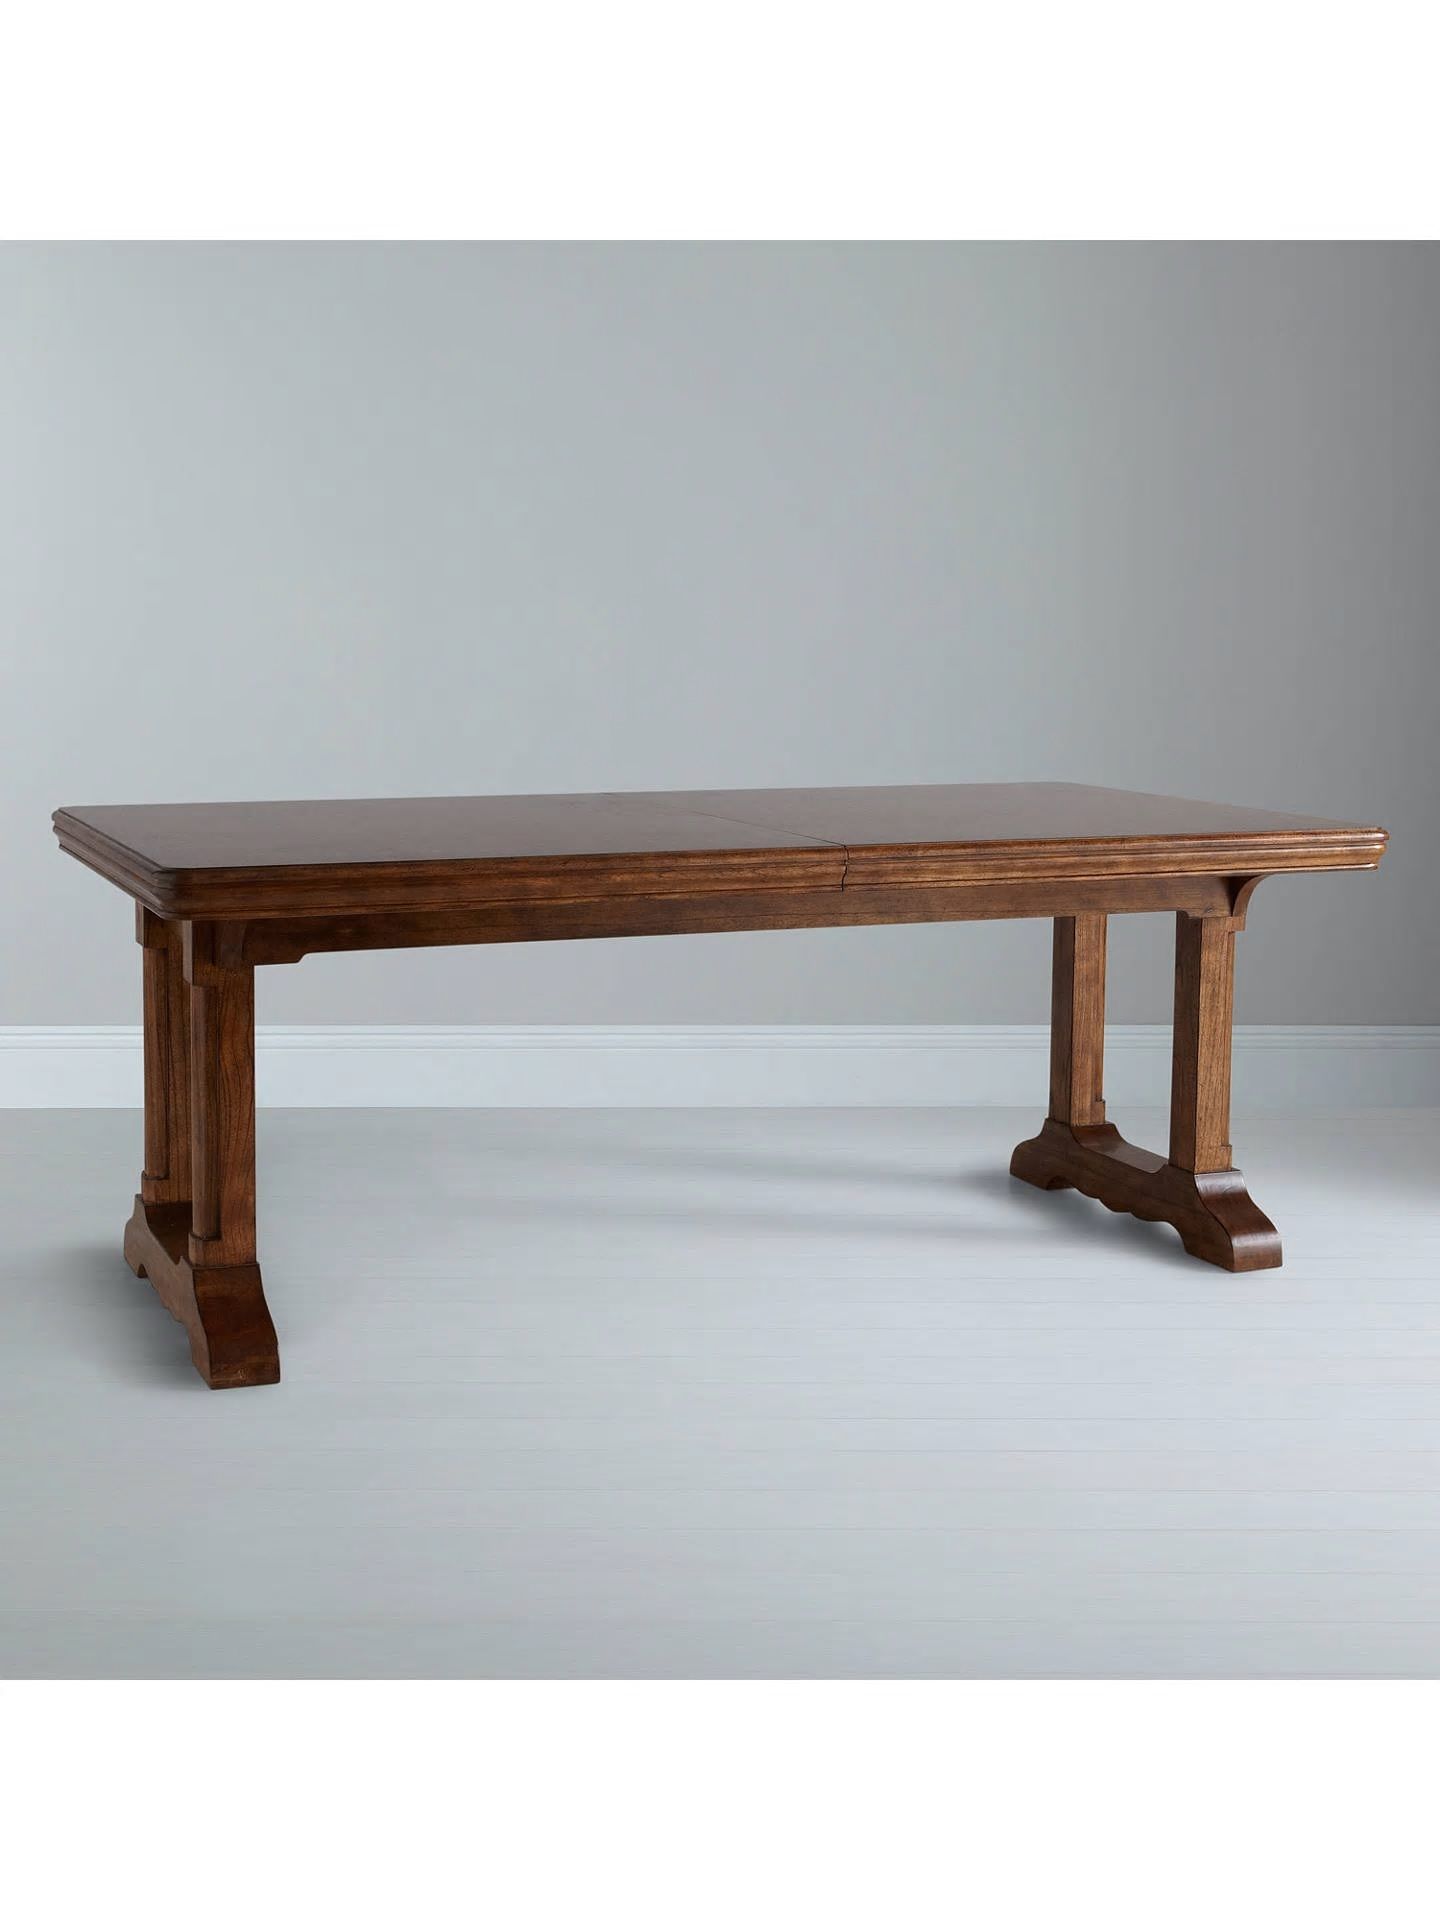 Hemingway 6-10 Seater Extending Dining Table - Image 2 of 2